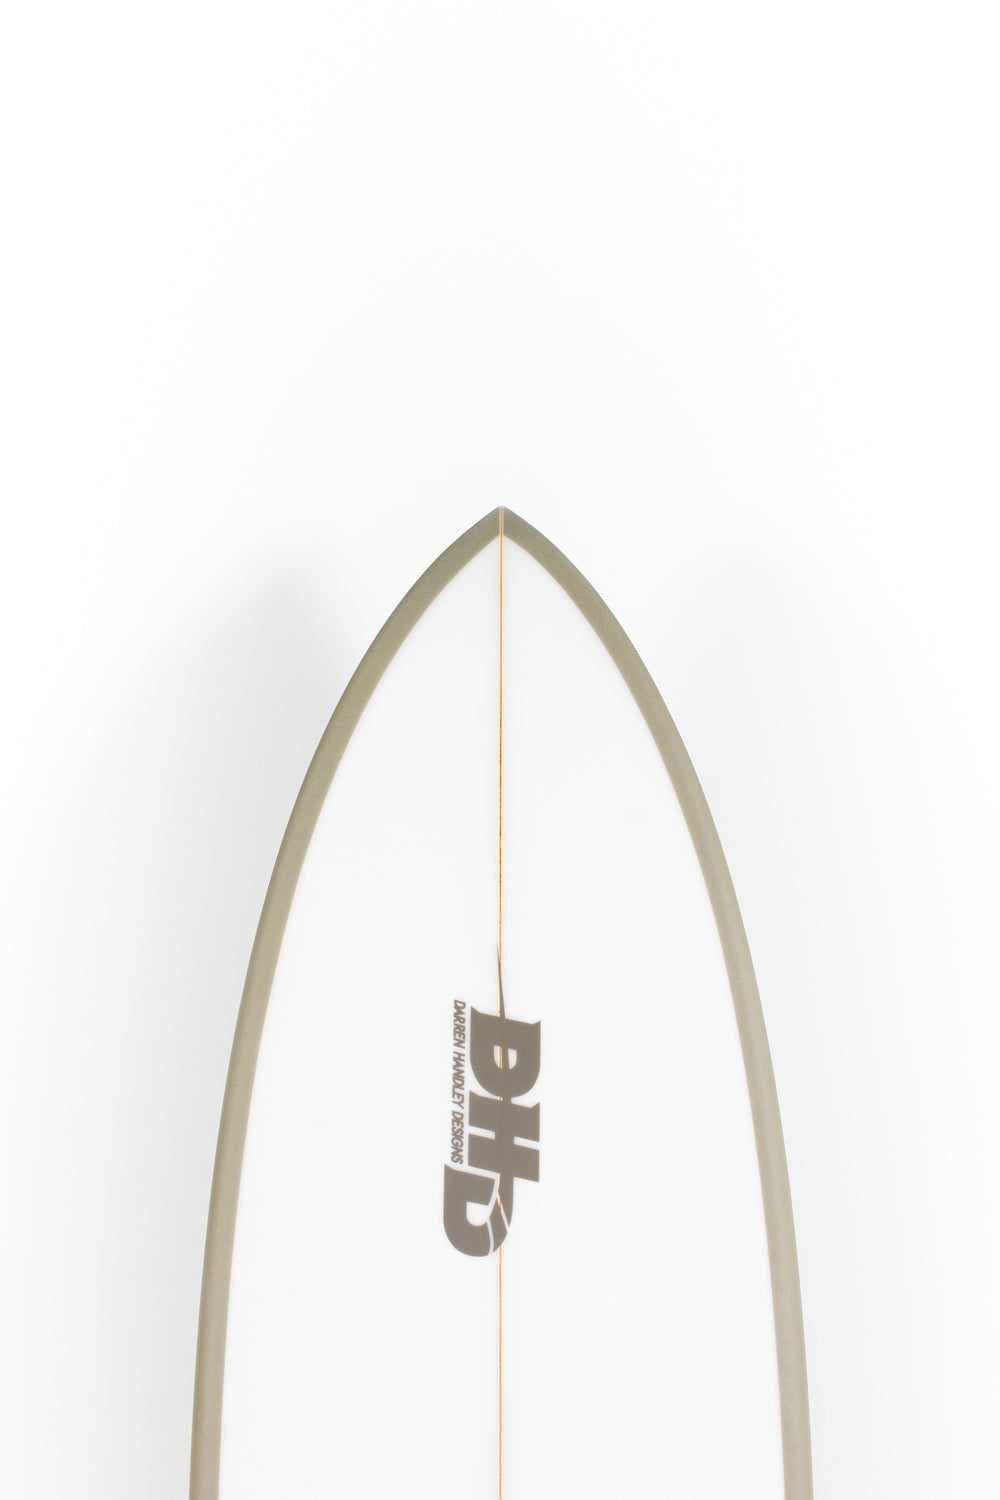 DHD surfboard The Twin 5'10 DHDサーフボード - www.hondaprokevin.com